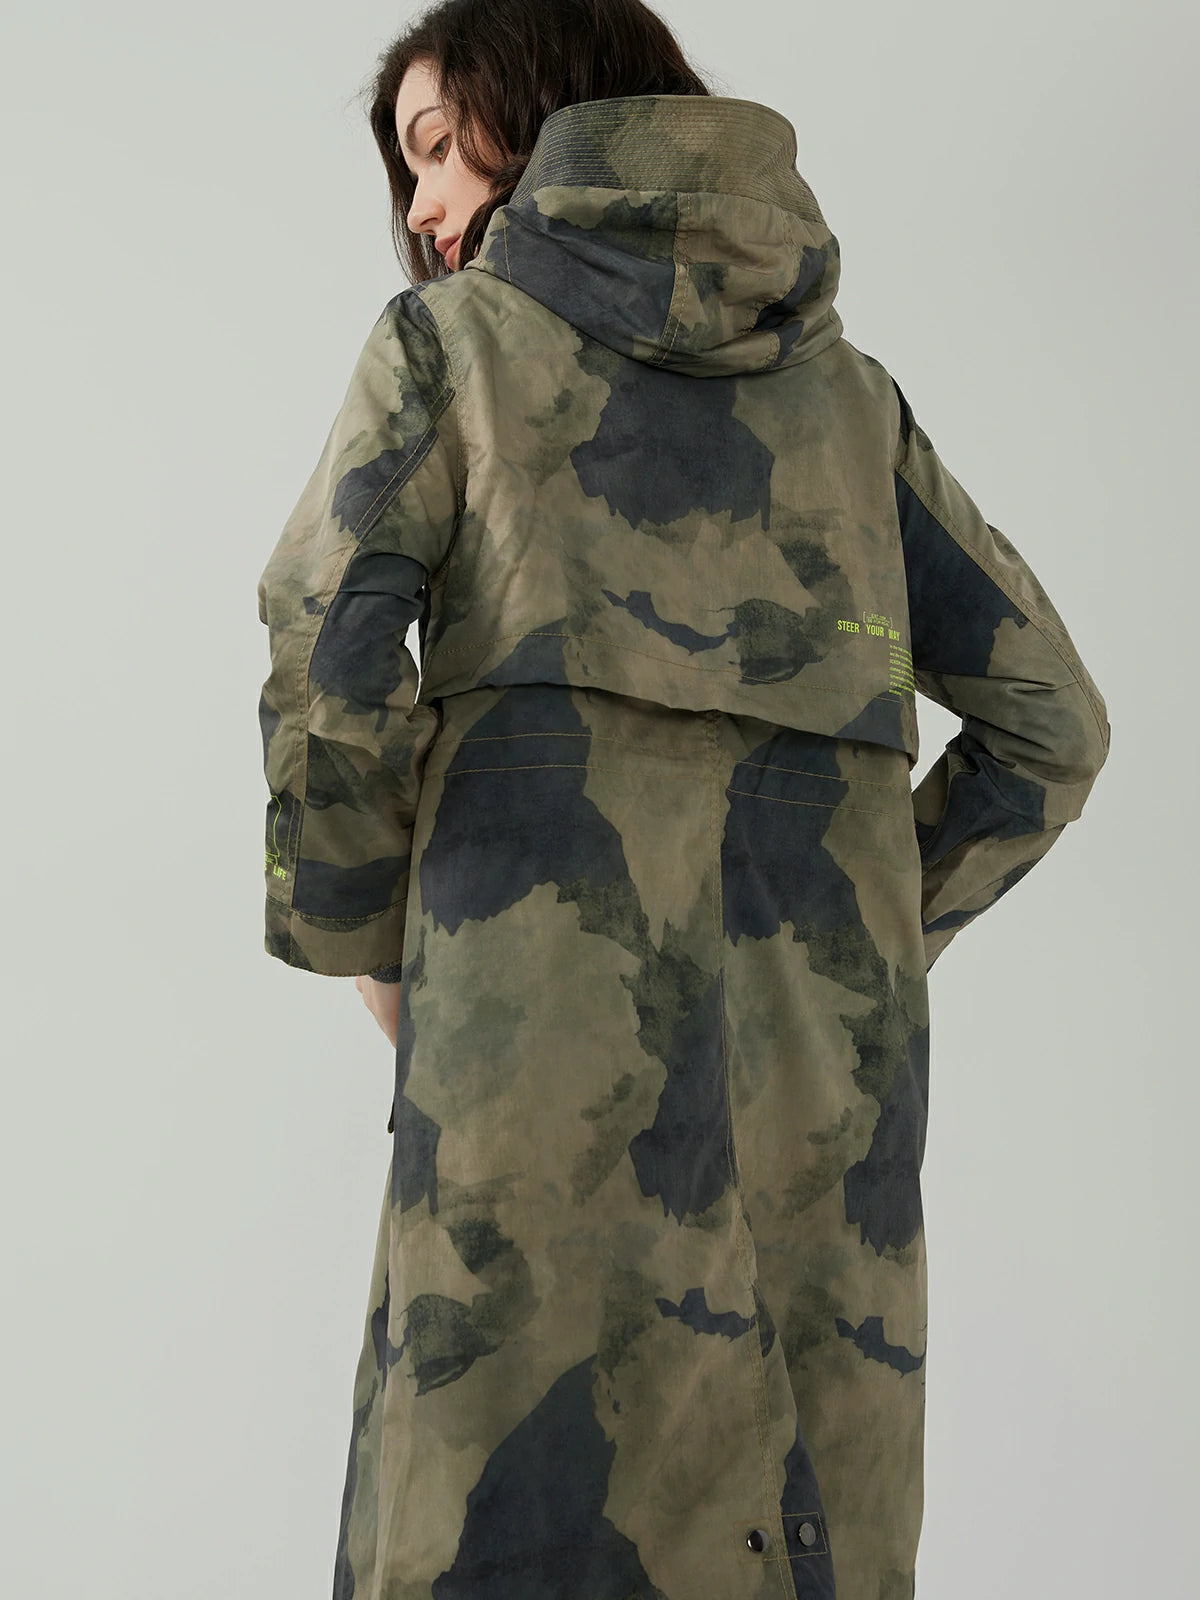 Fashion-forward outerwear with a trendy blend of camouflage and fluorescent letter elements